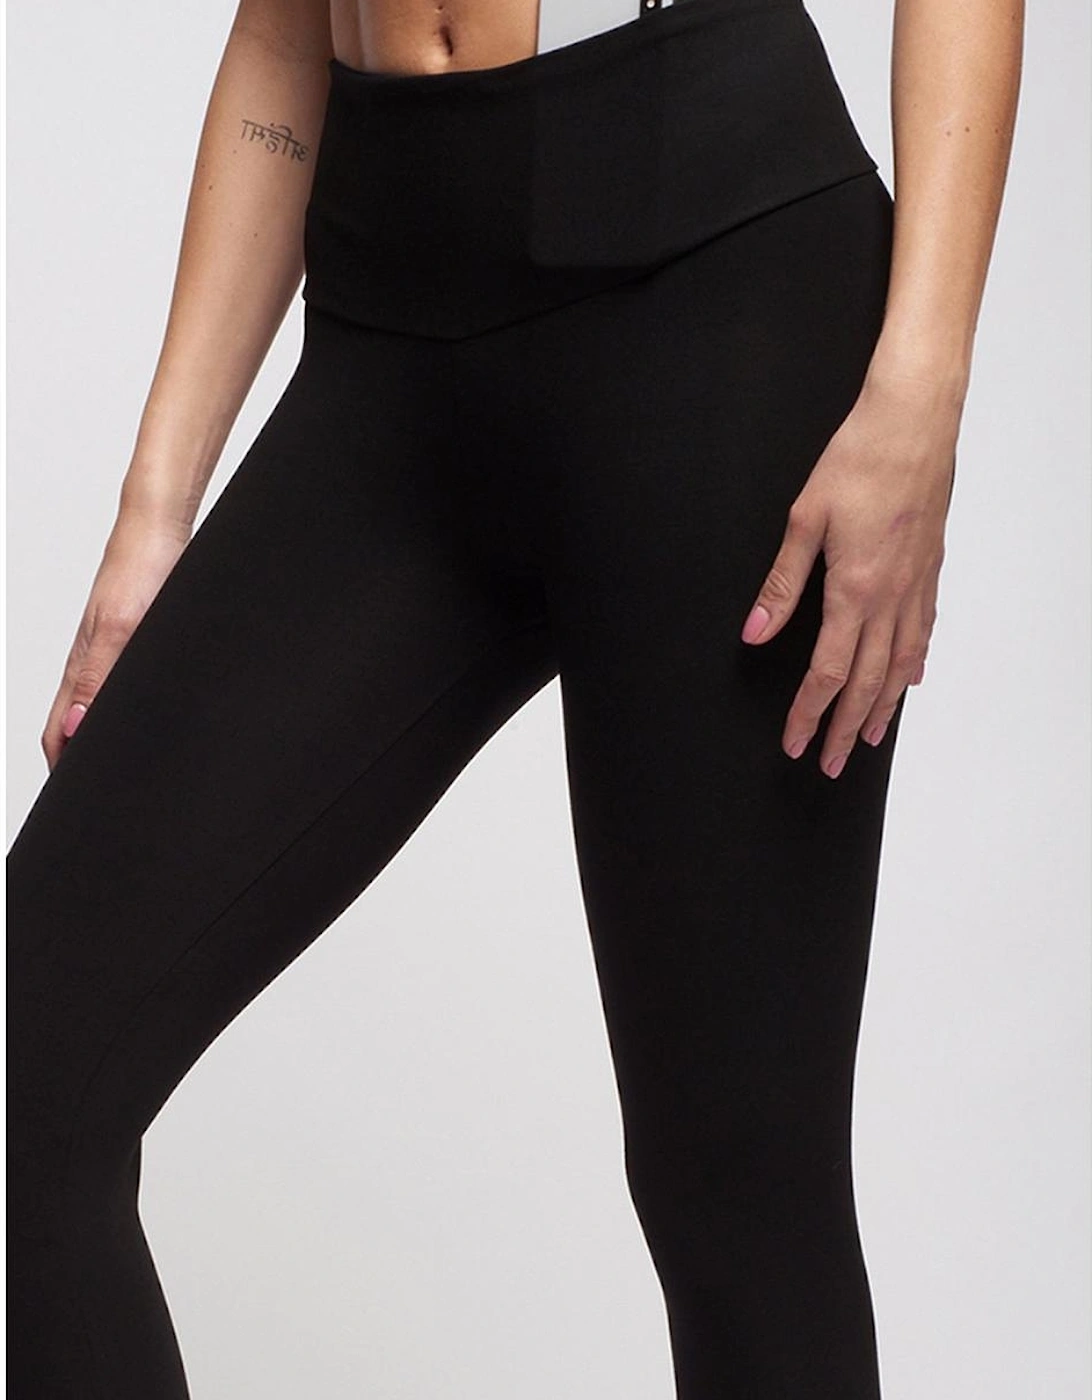 Tummy Control Extra Strong Compression Full Length Legging - Black